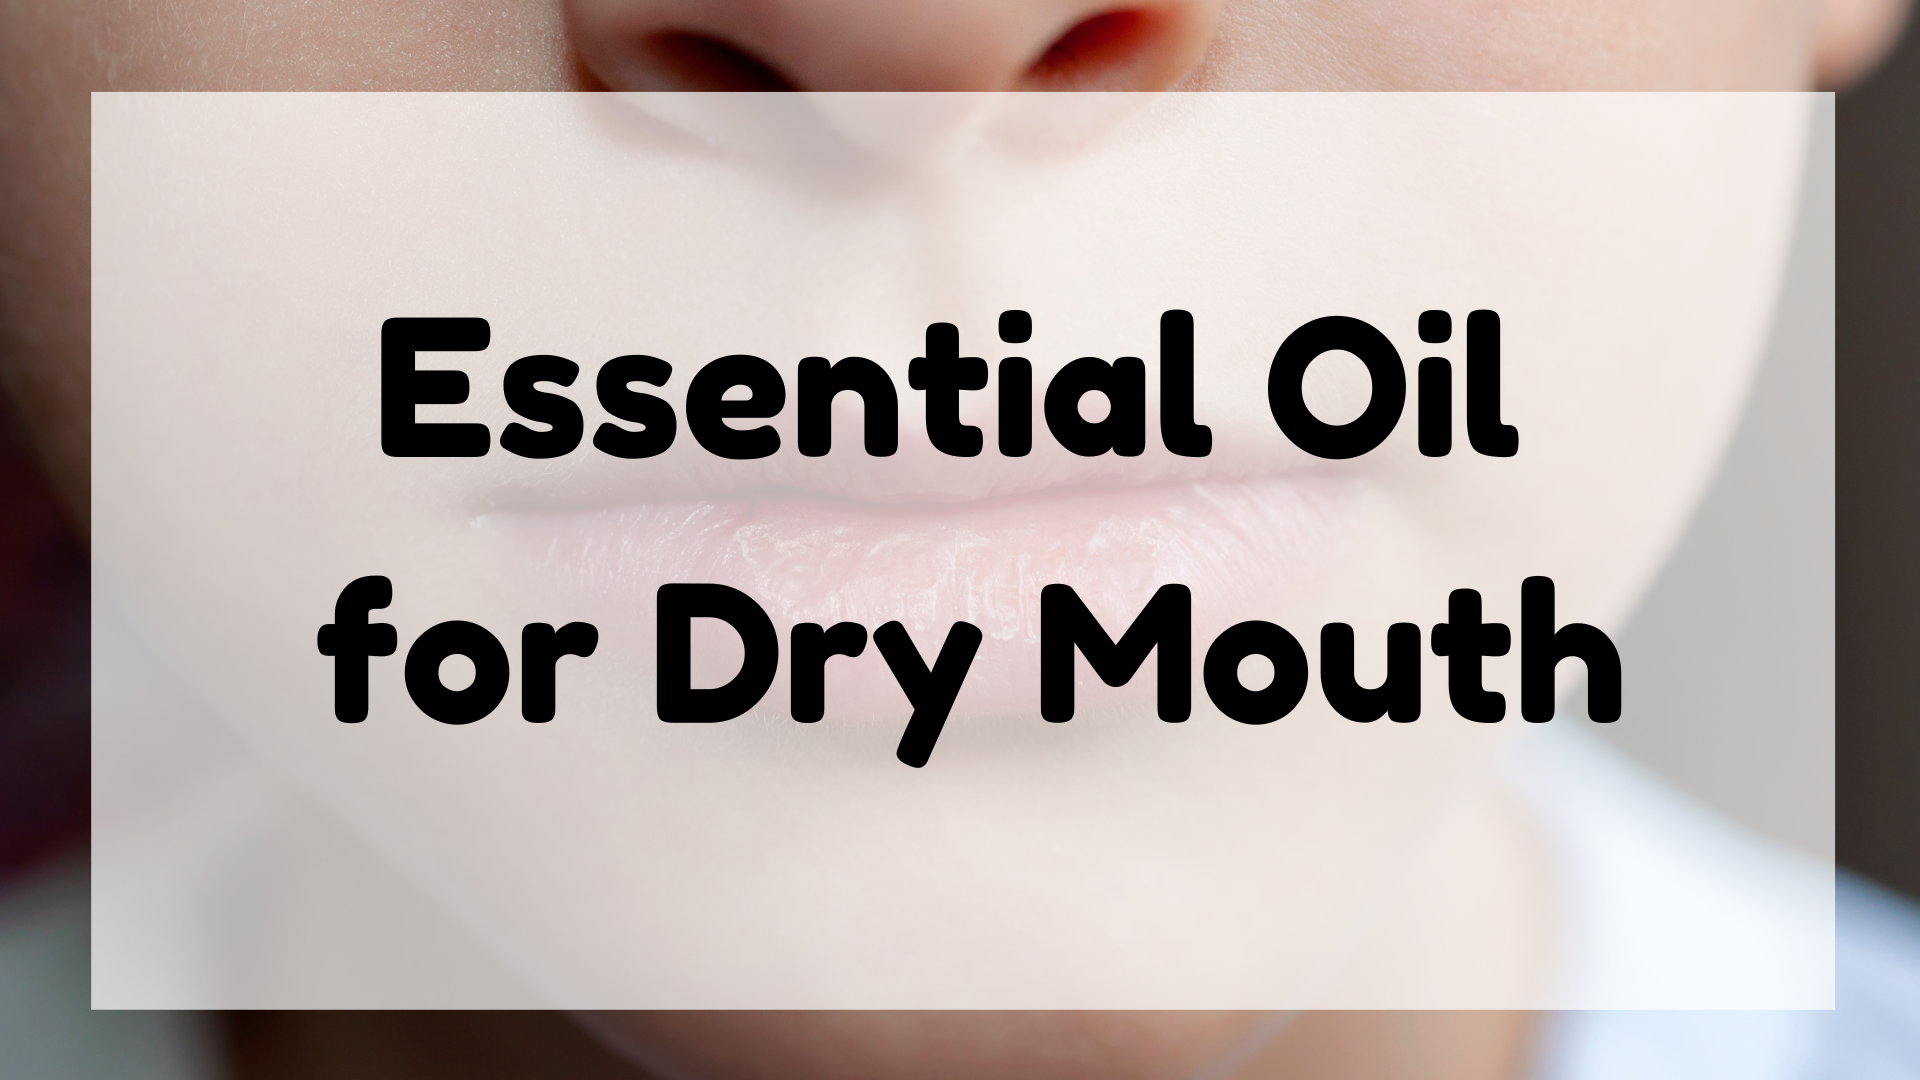 Essential Oil for Dry Mouth featured image